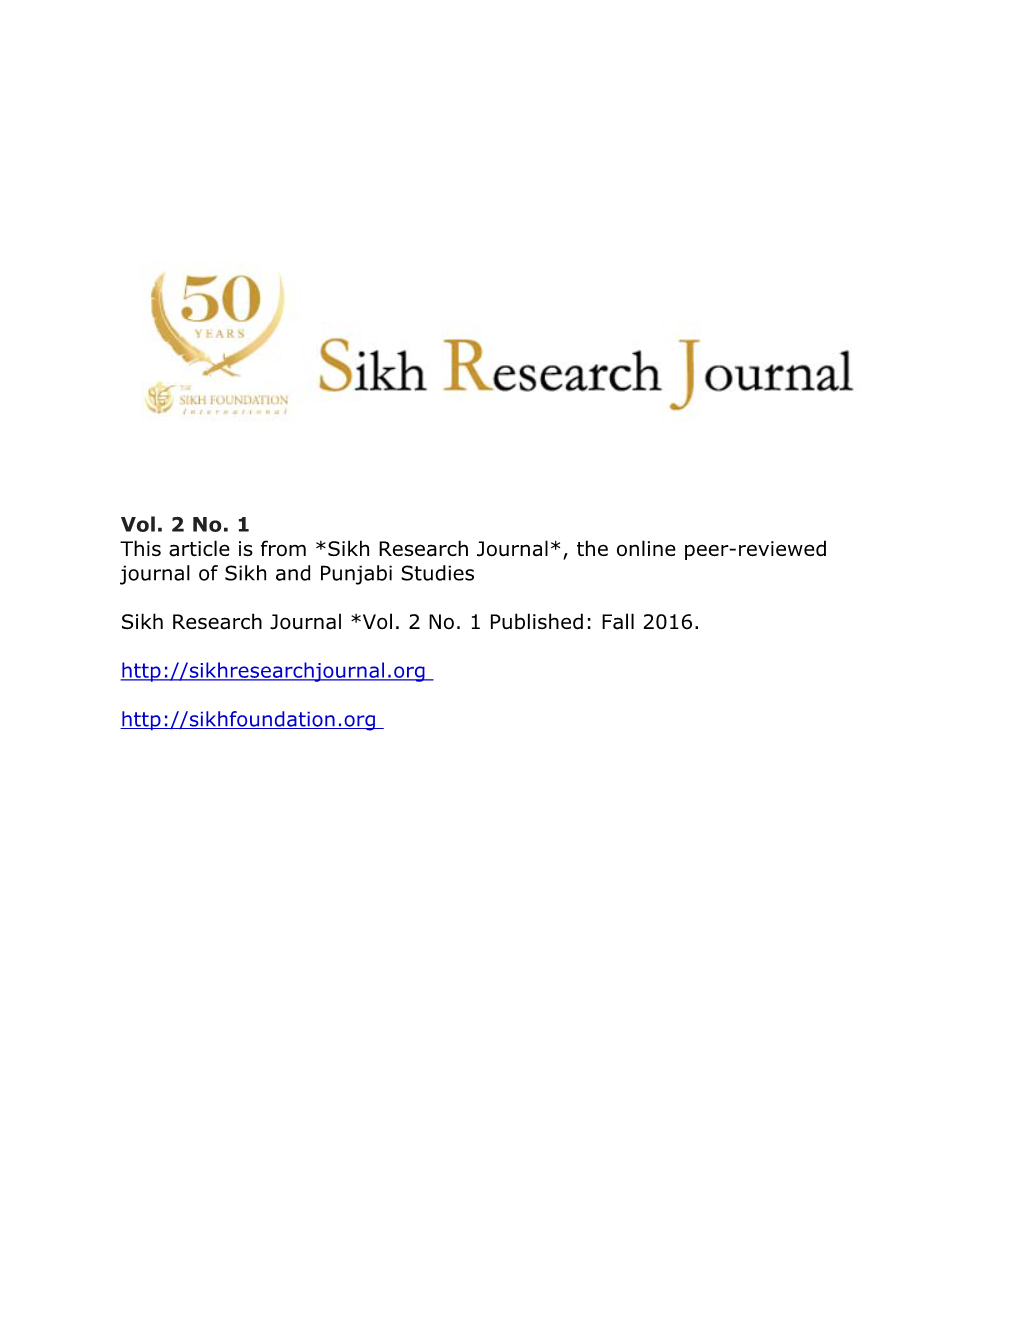 Vol. 2 No. 1 This Article Is from *Sikh Research Journal*, the Online Peer-Reviewed Journal of Sikh and Punjabi Studies